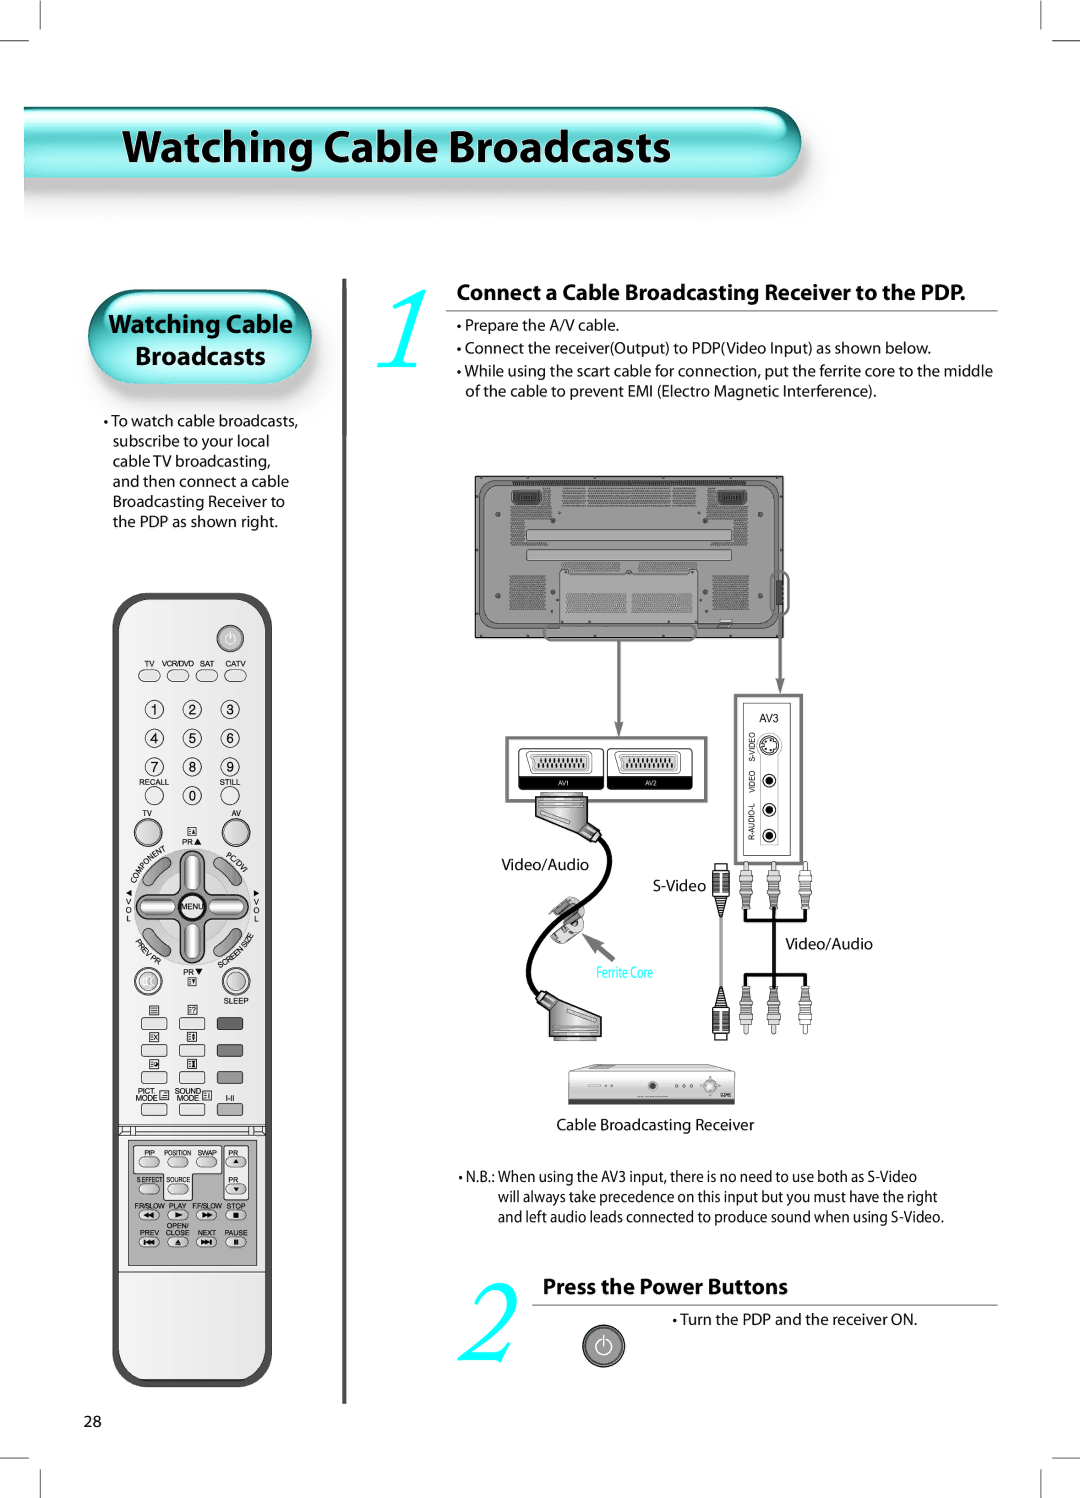 Daewoo DT-42A1 user manual Watching Cable Broadcasts, Press the Power Buttons 